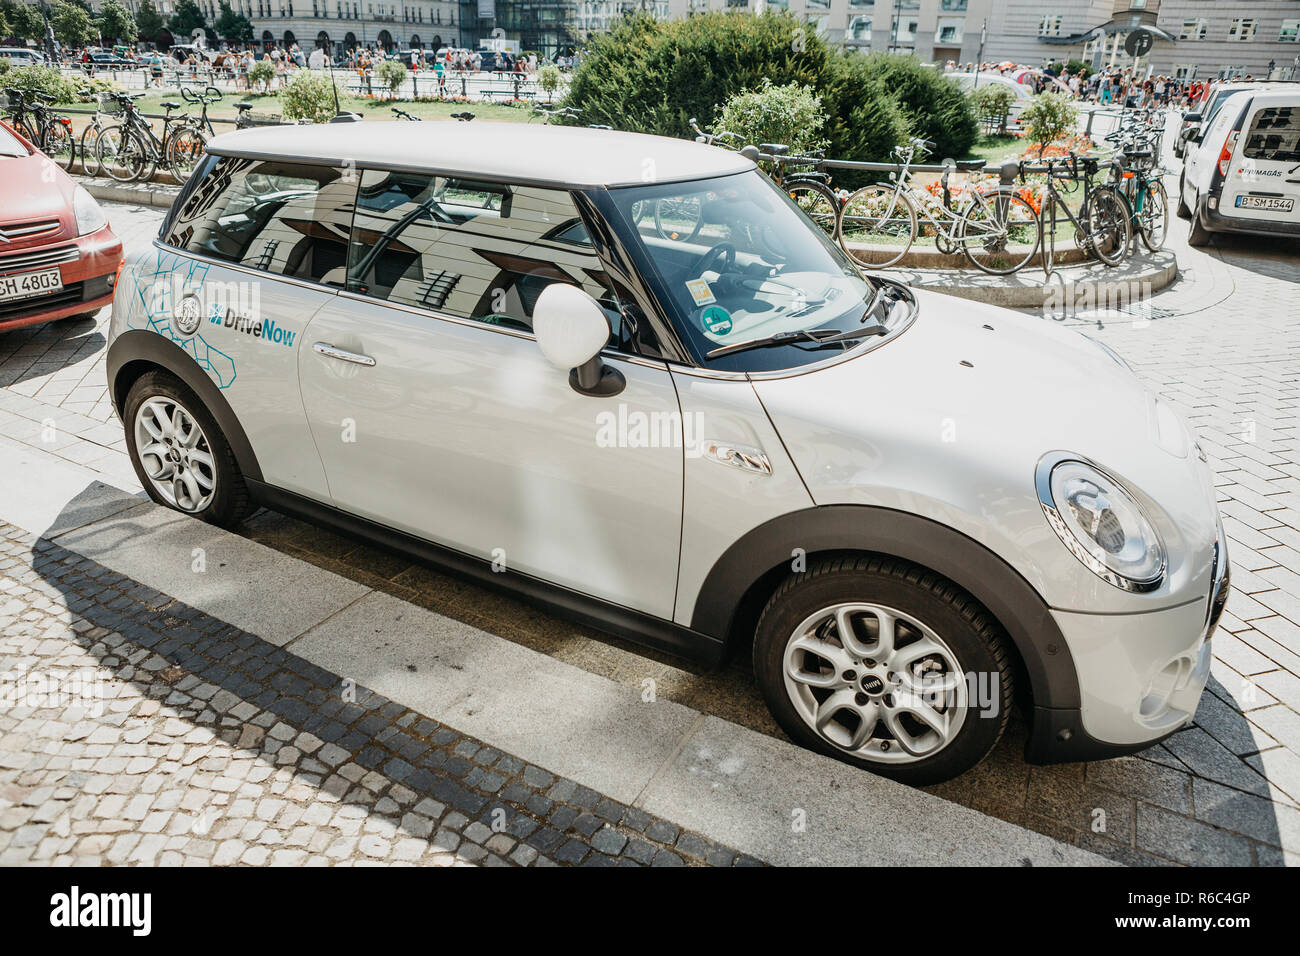 Germany, Berlin, September 05, 2018: A BMW electric car for the rental from a company called DriveNow is parked on a city street. Car rental takes place through a mobile application on a mobile phone. Stock Photo